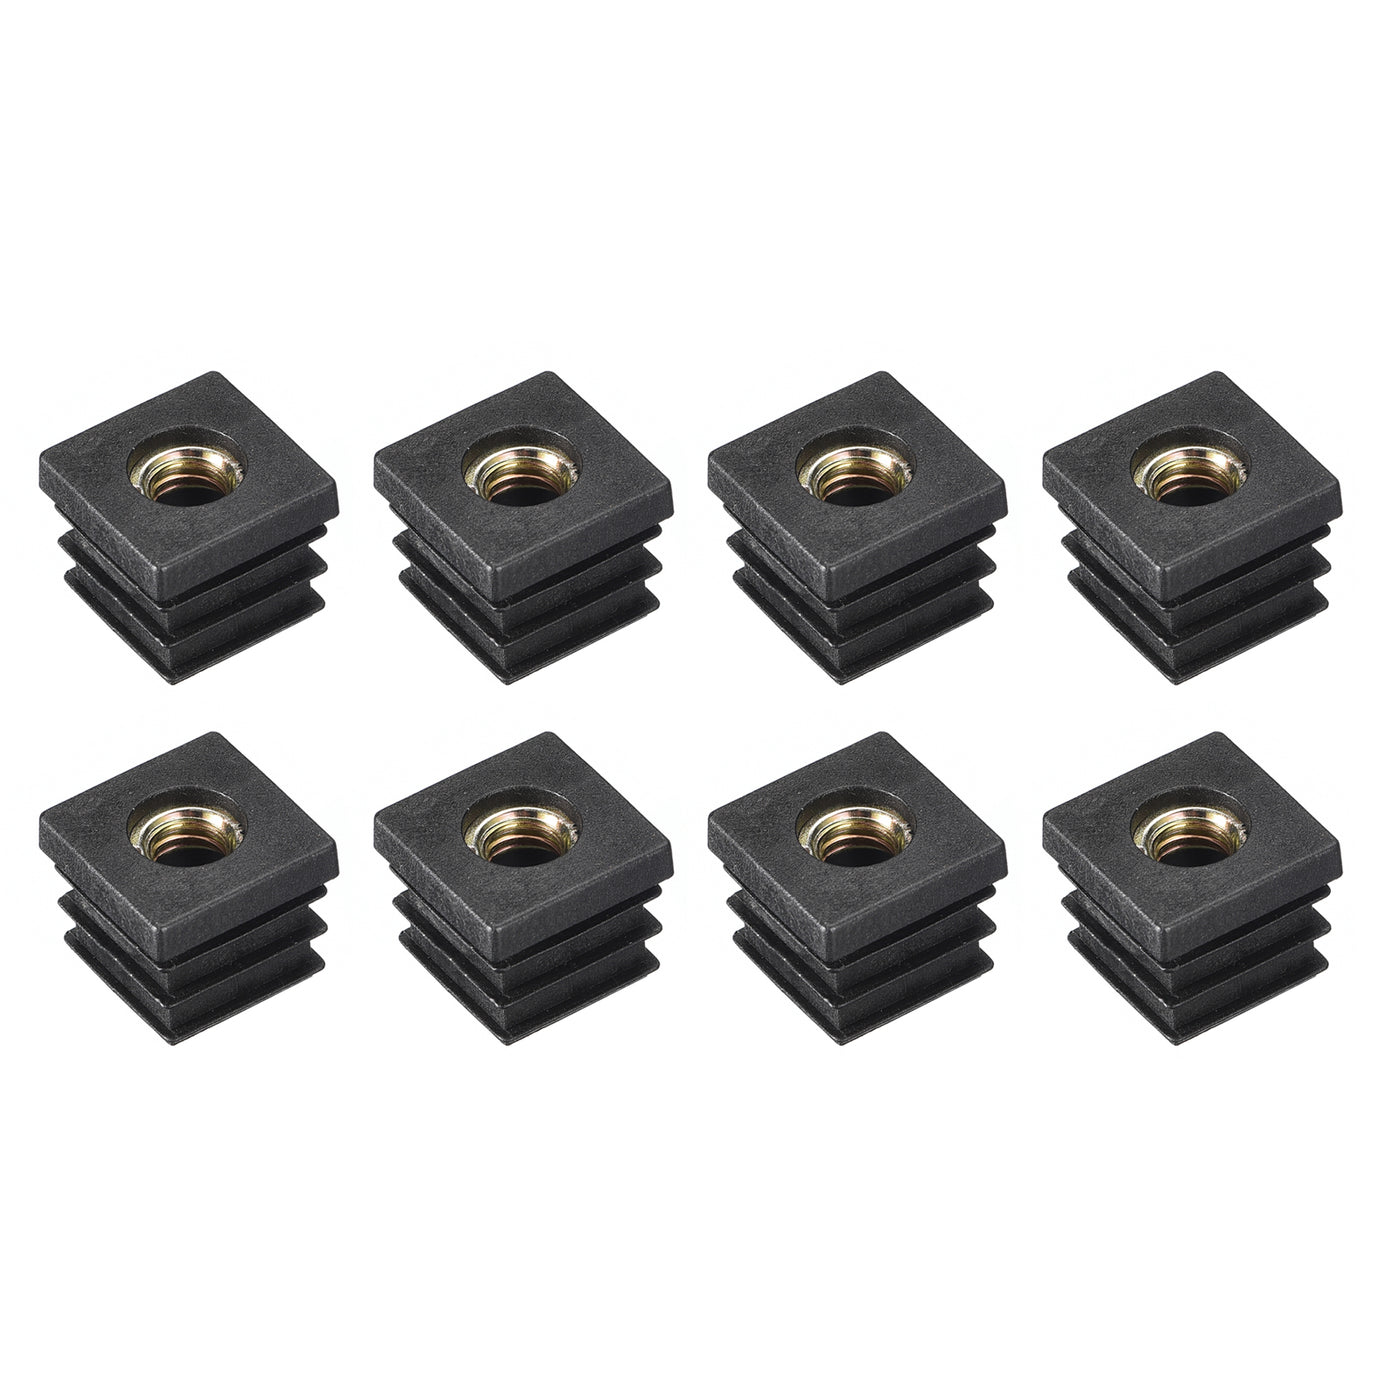 uxcell Uxcell 8Pcs 0.87"x0.87" Caster Insert with Thread, Square M8 Thread for Furniture